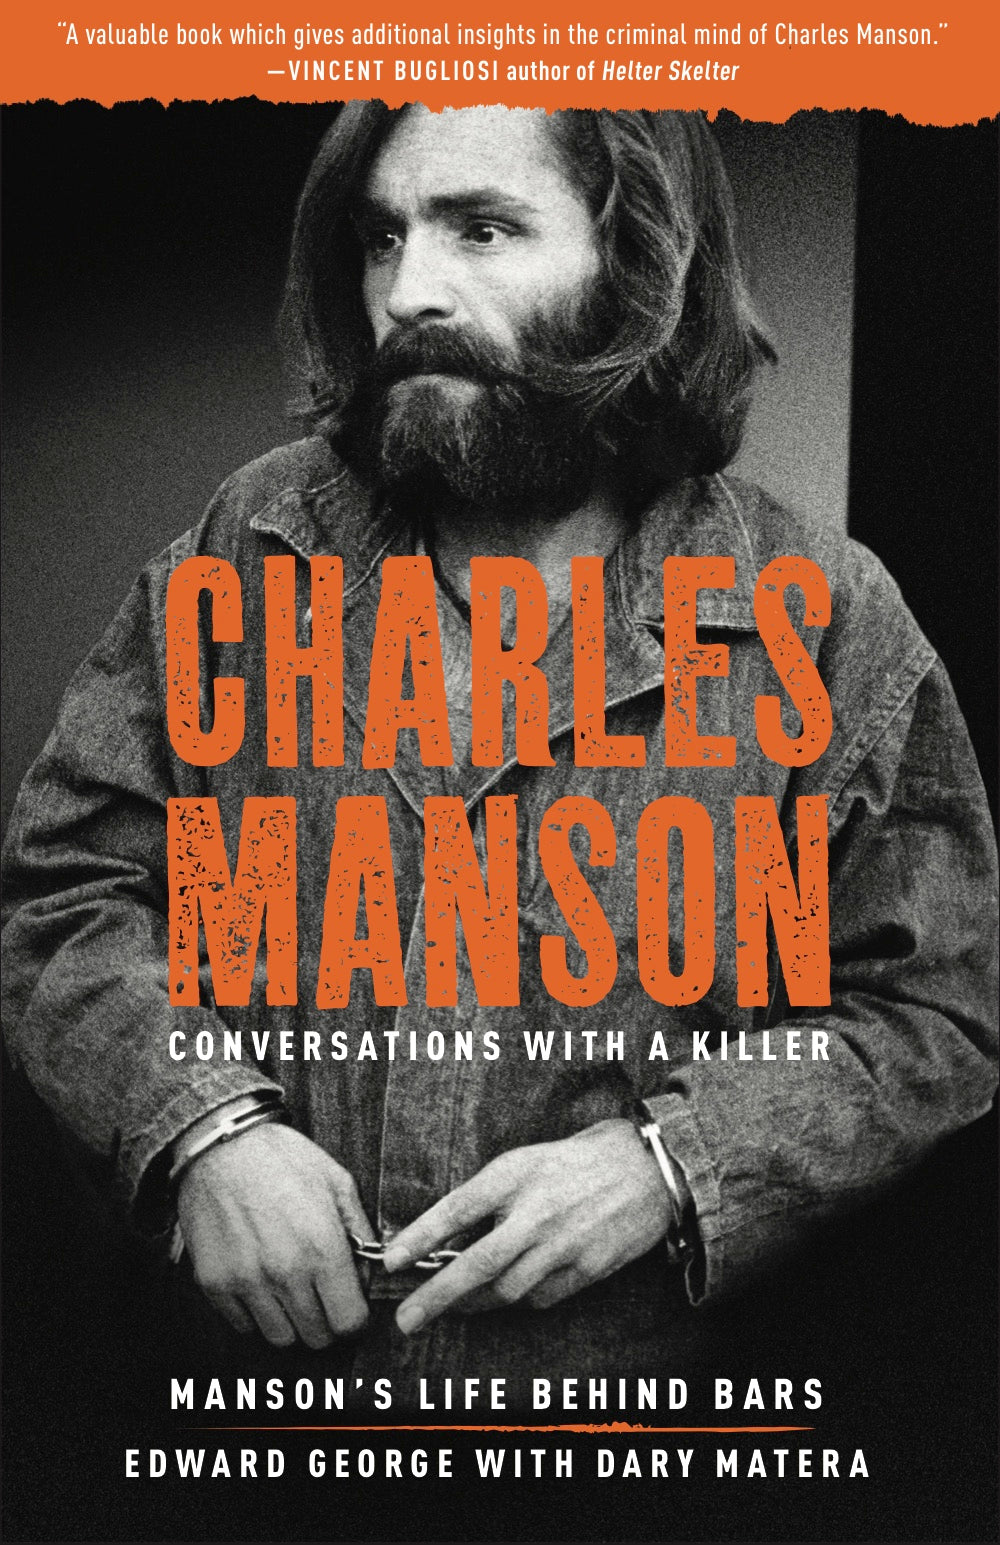 Book - Charles Manson: Conversations With A Killer-hotRAGS.com